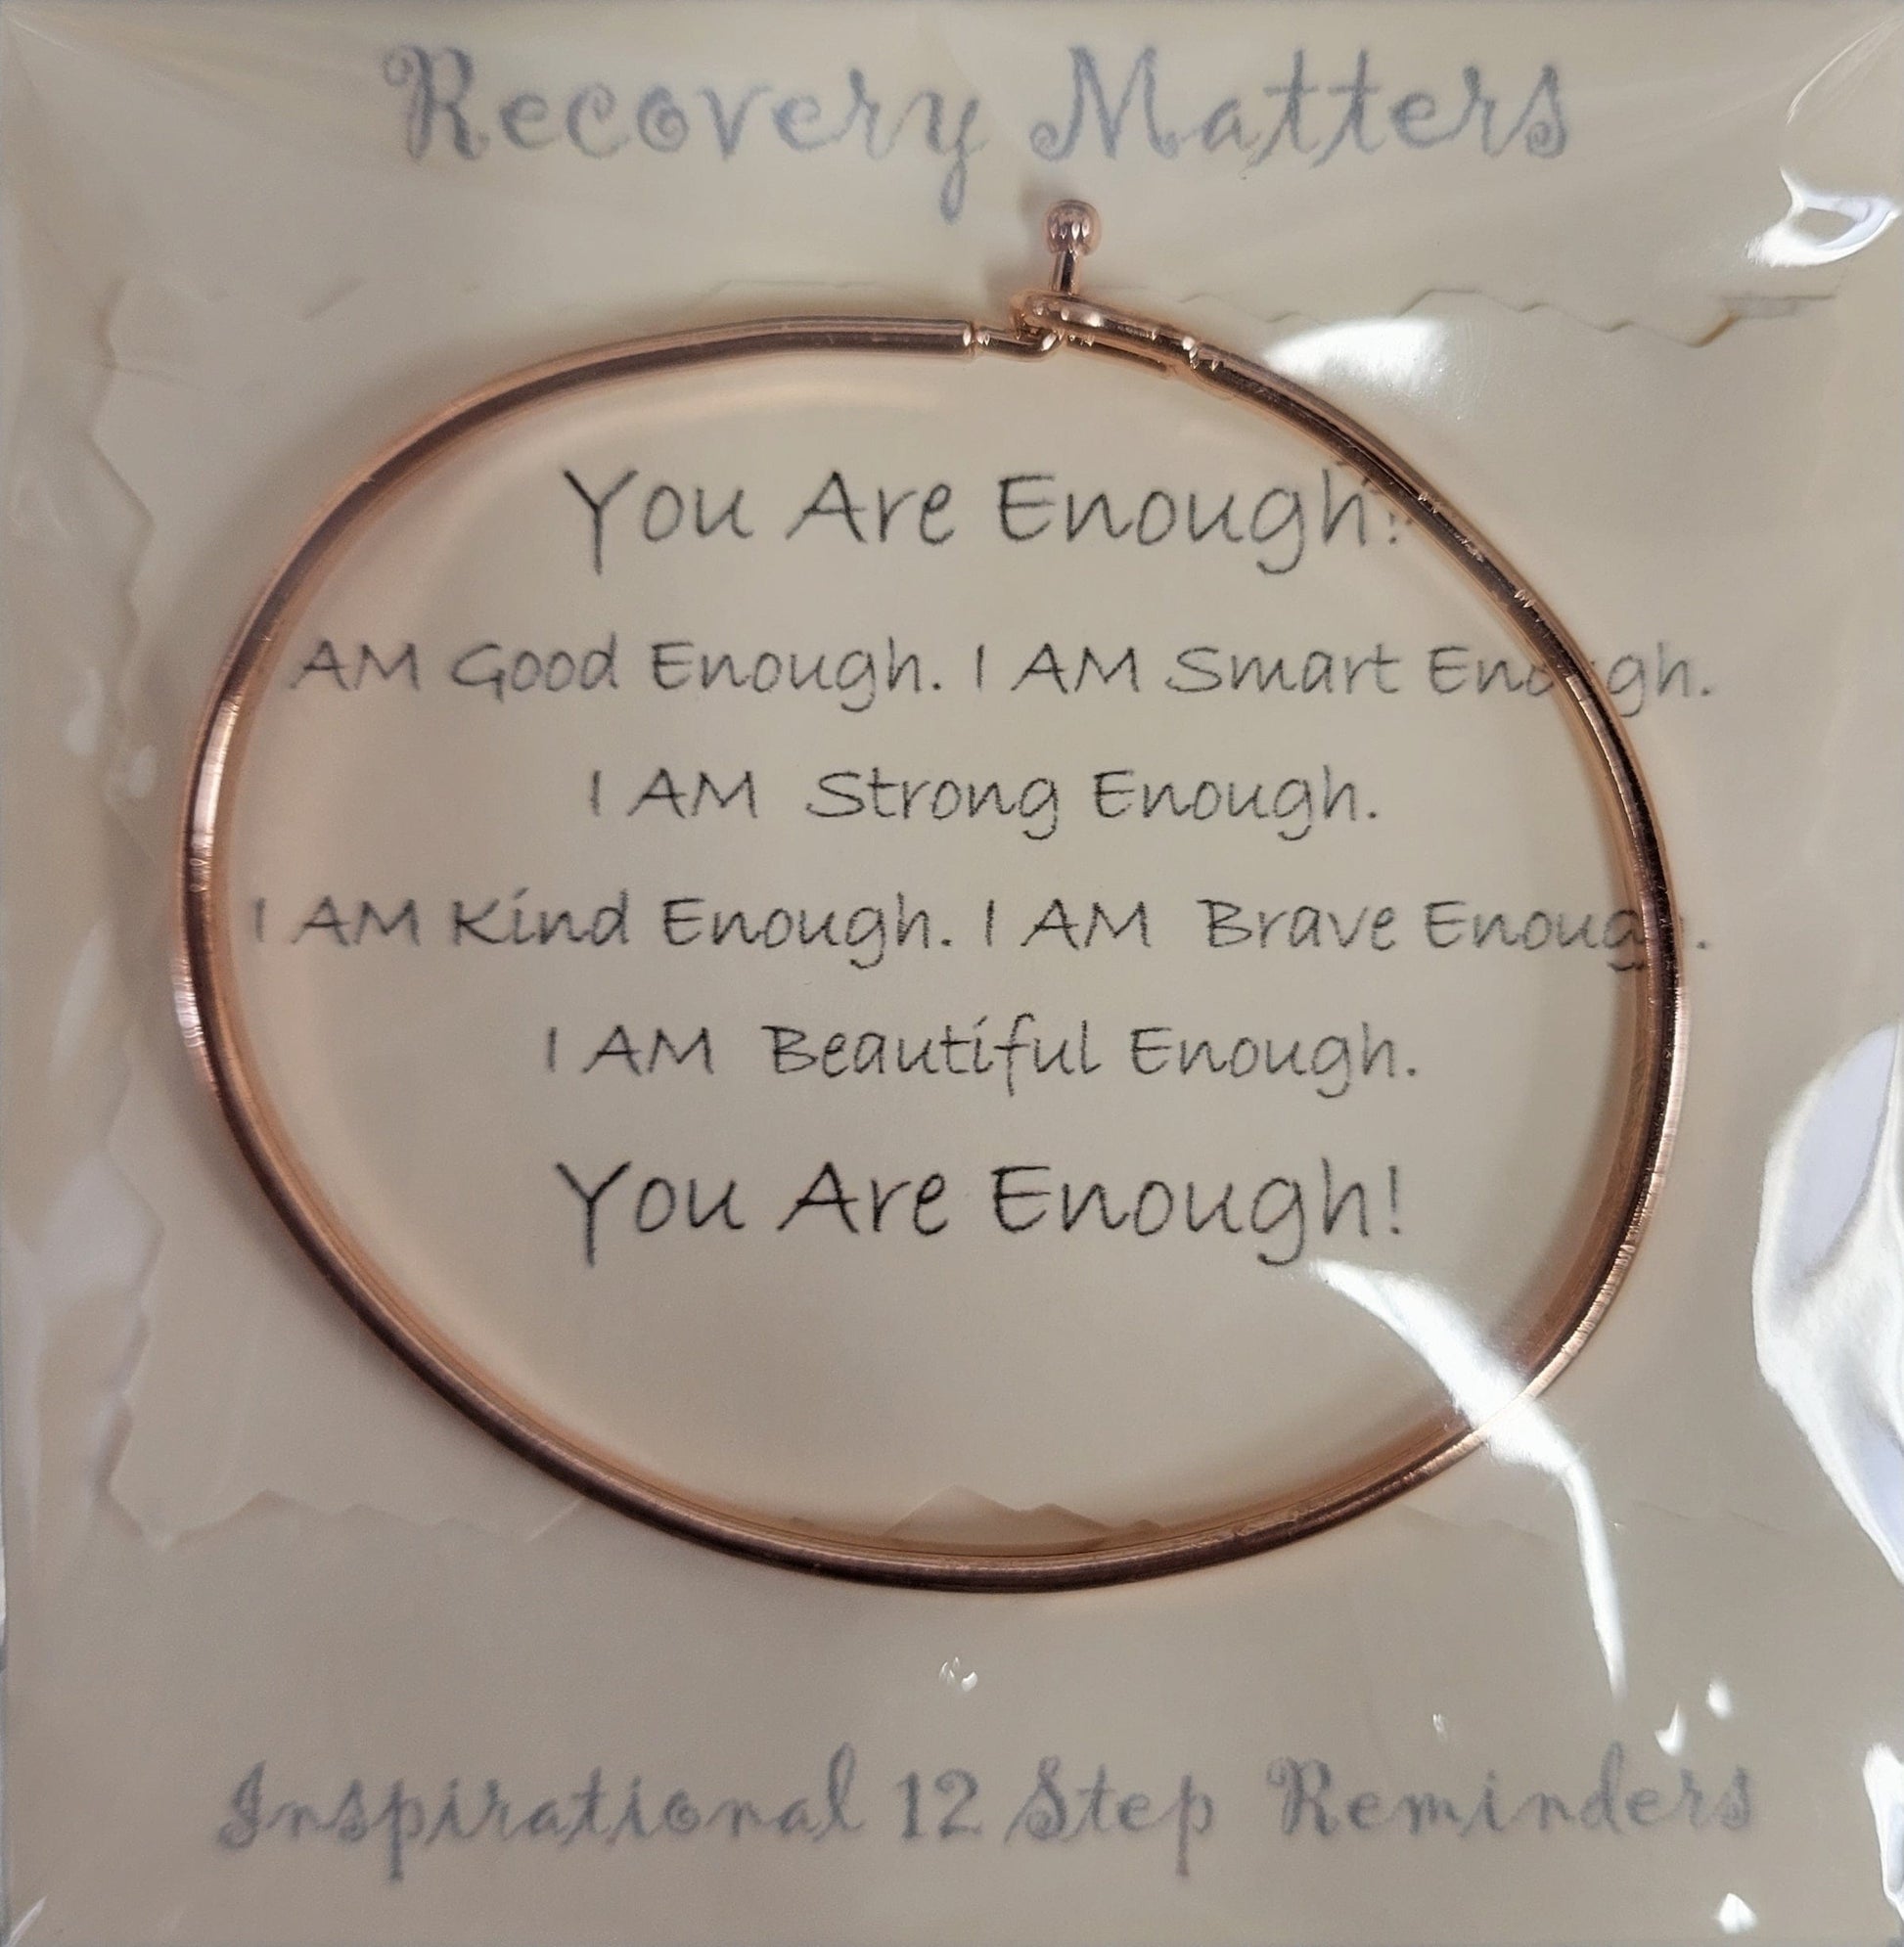 "You Are Enough!" Bracelet By Recovery Matters Rose Gold